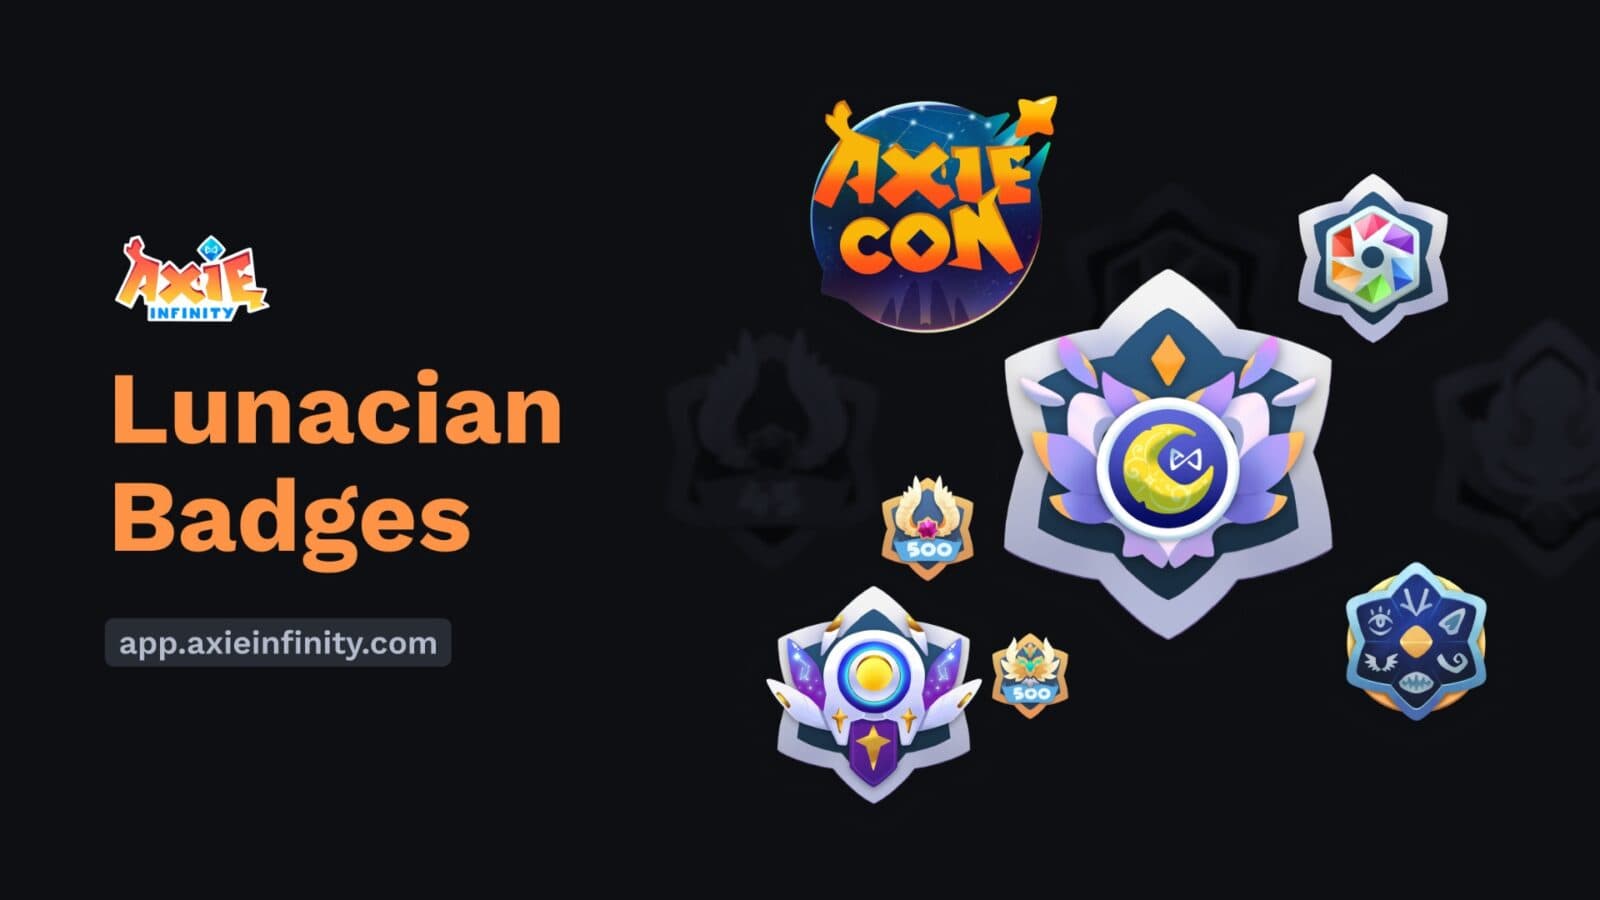 Axie Infinity Celebrates by Announcing Lunacian Badges